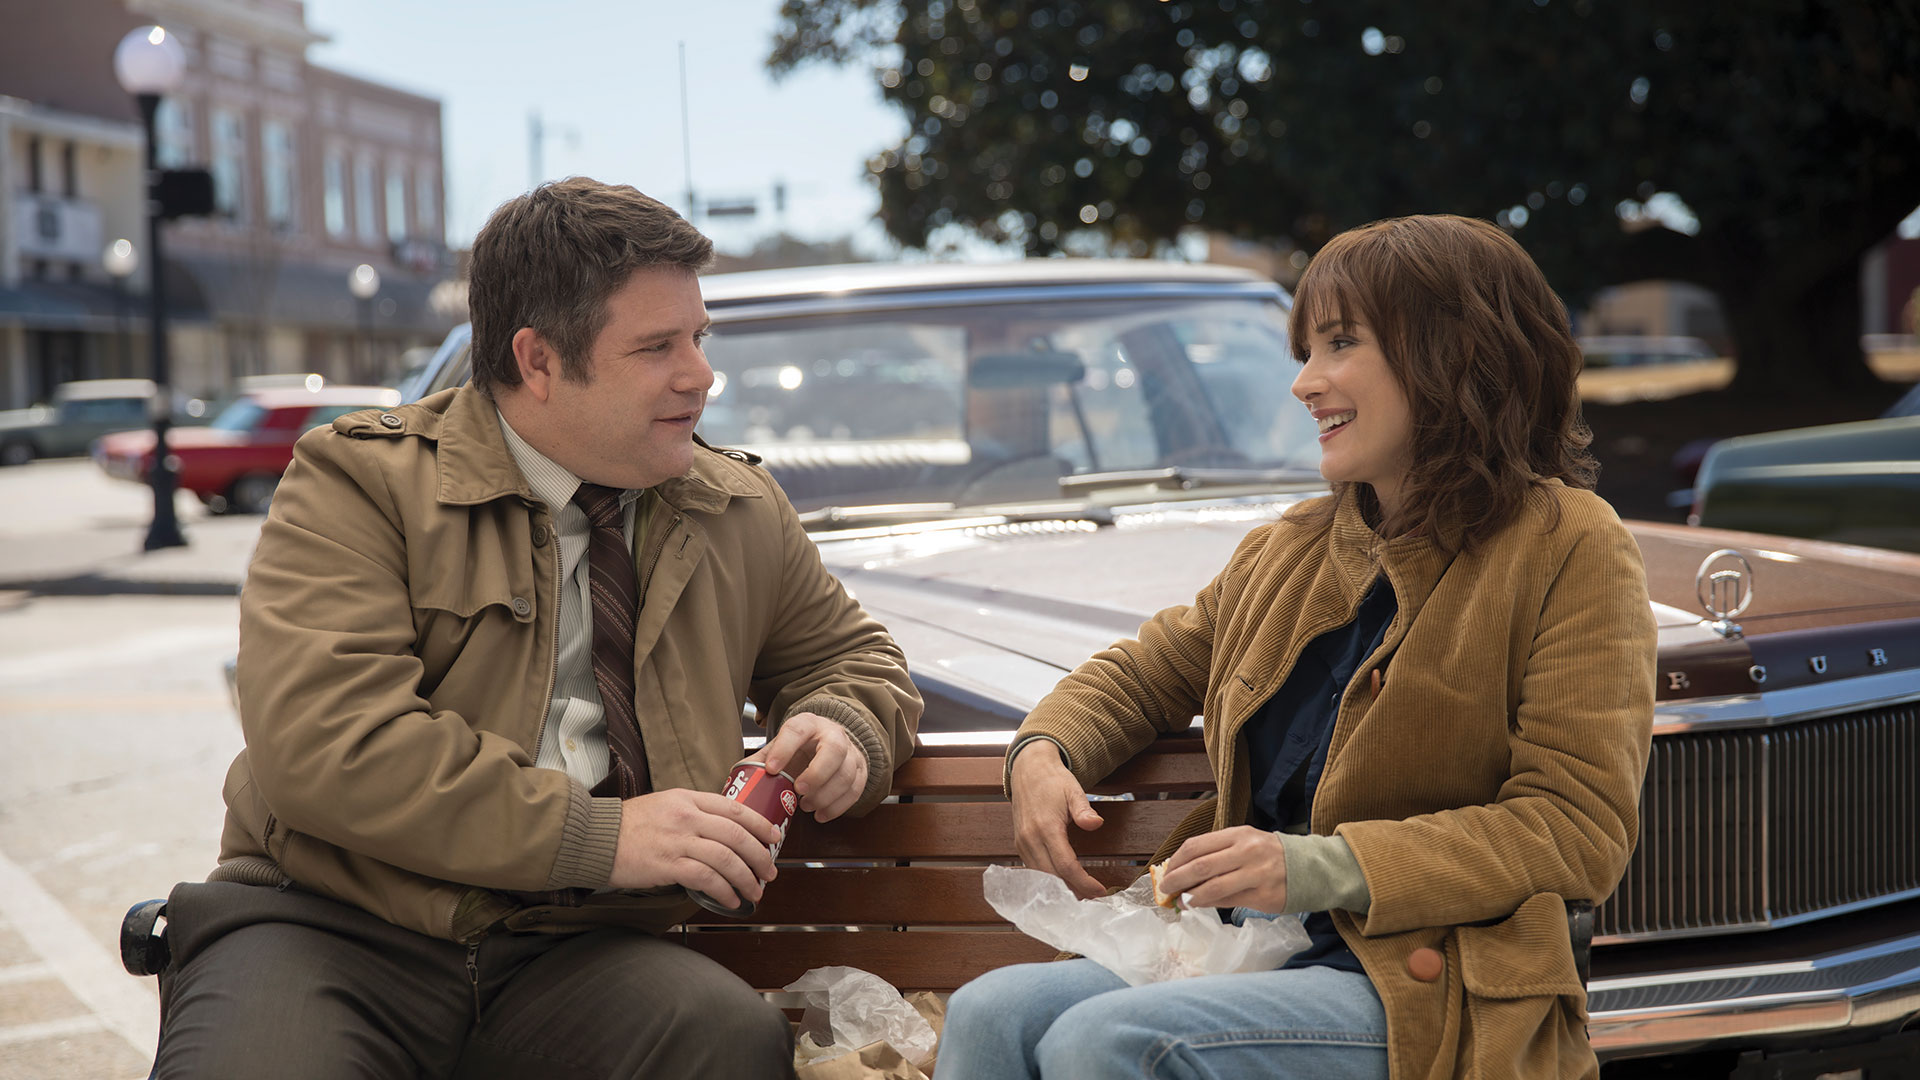 Sean Astin and Winona Ryder in Stranger Things 2